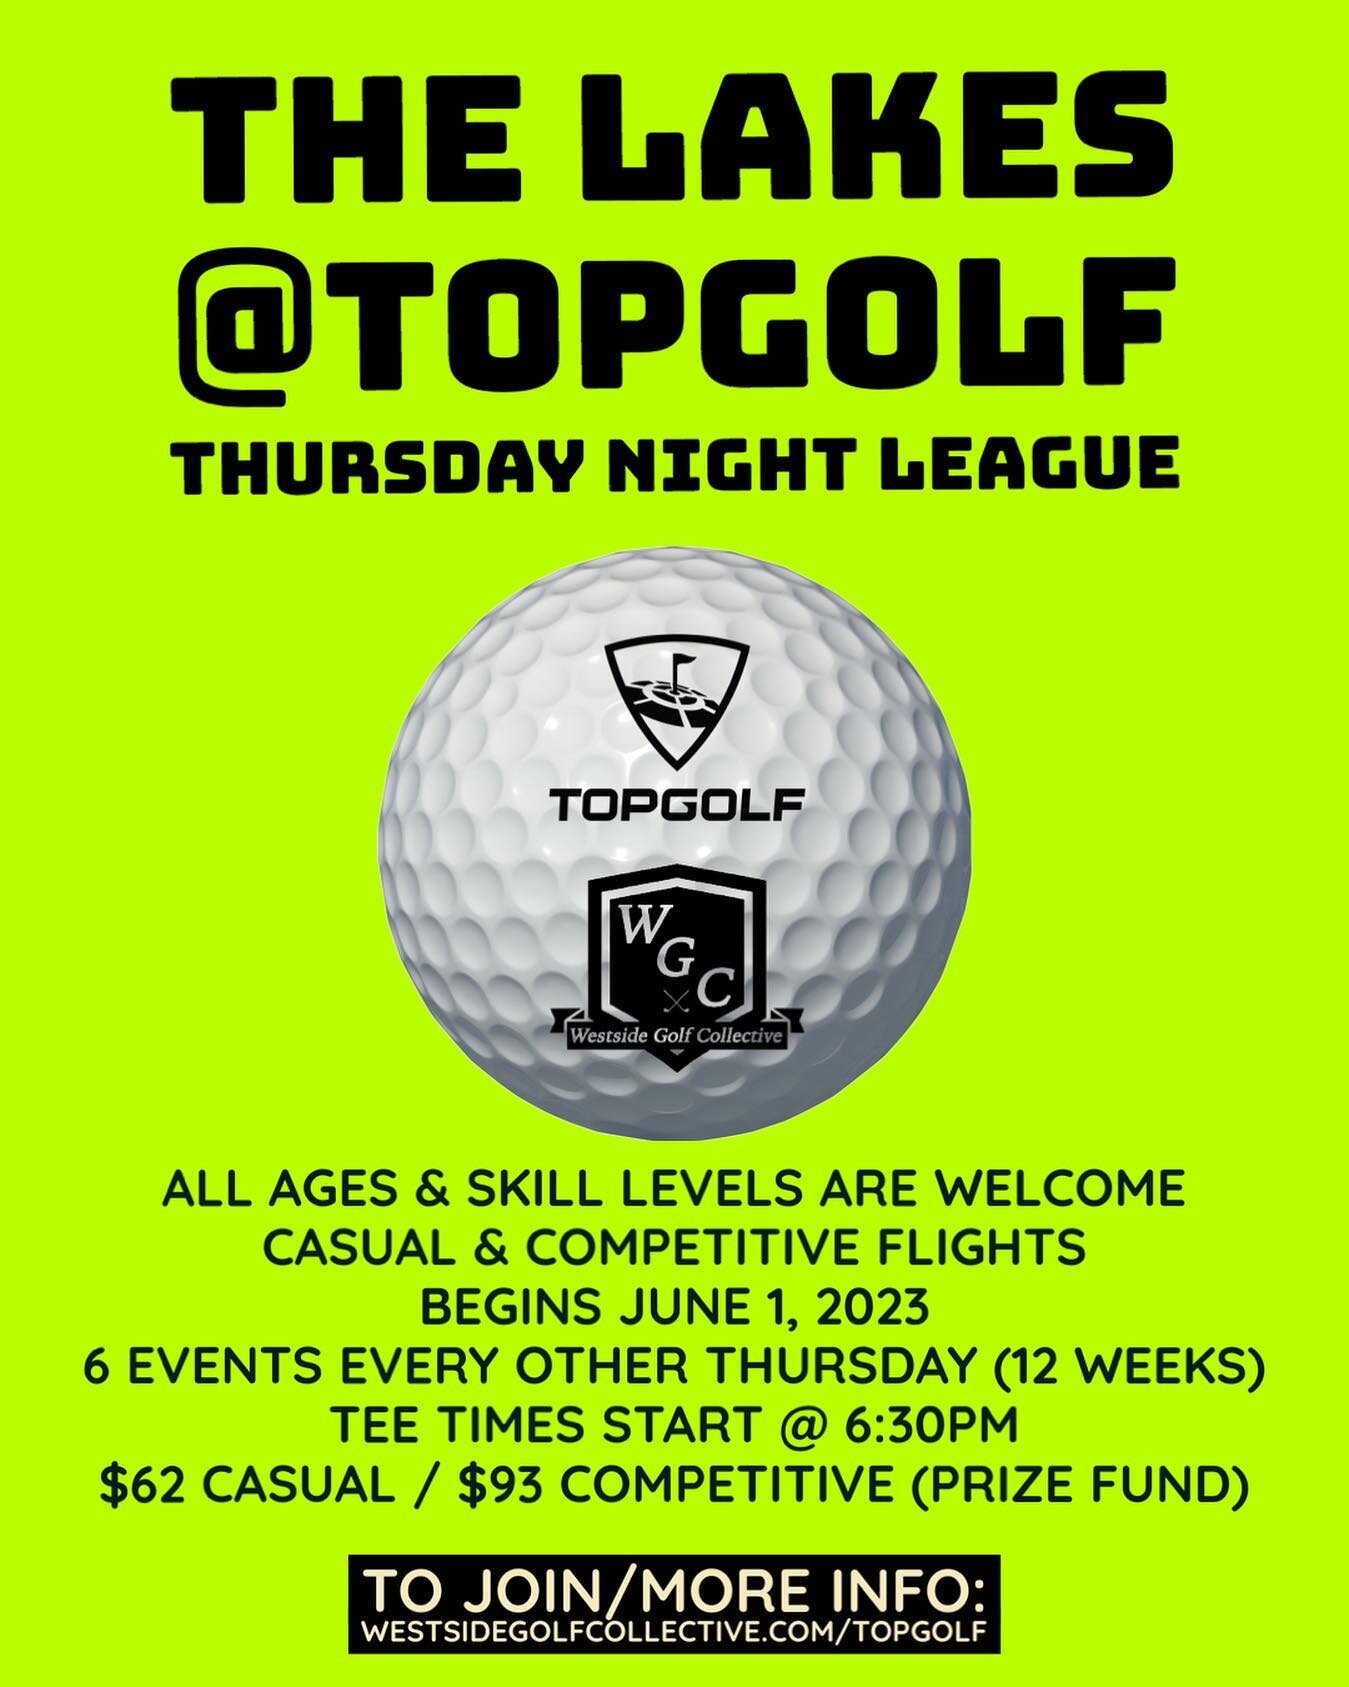 Season 2 starts June 1, 2023
Registration link in bio
All ages &amp; skill levels are welcome
Casual &amp; Competitive flights 
Every other Thursday night
Tee-times begin @ 6:30PM